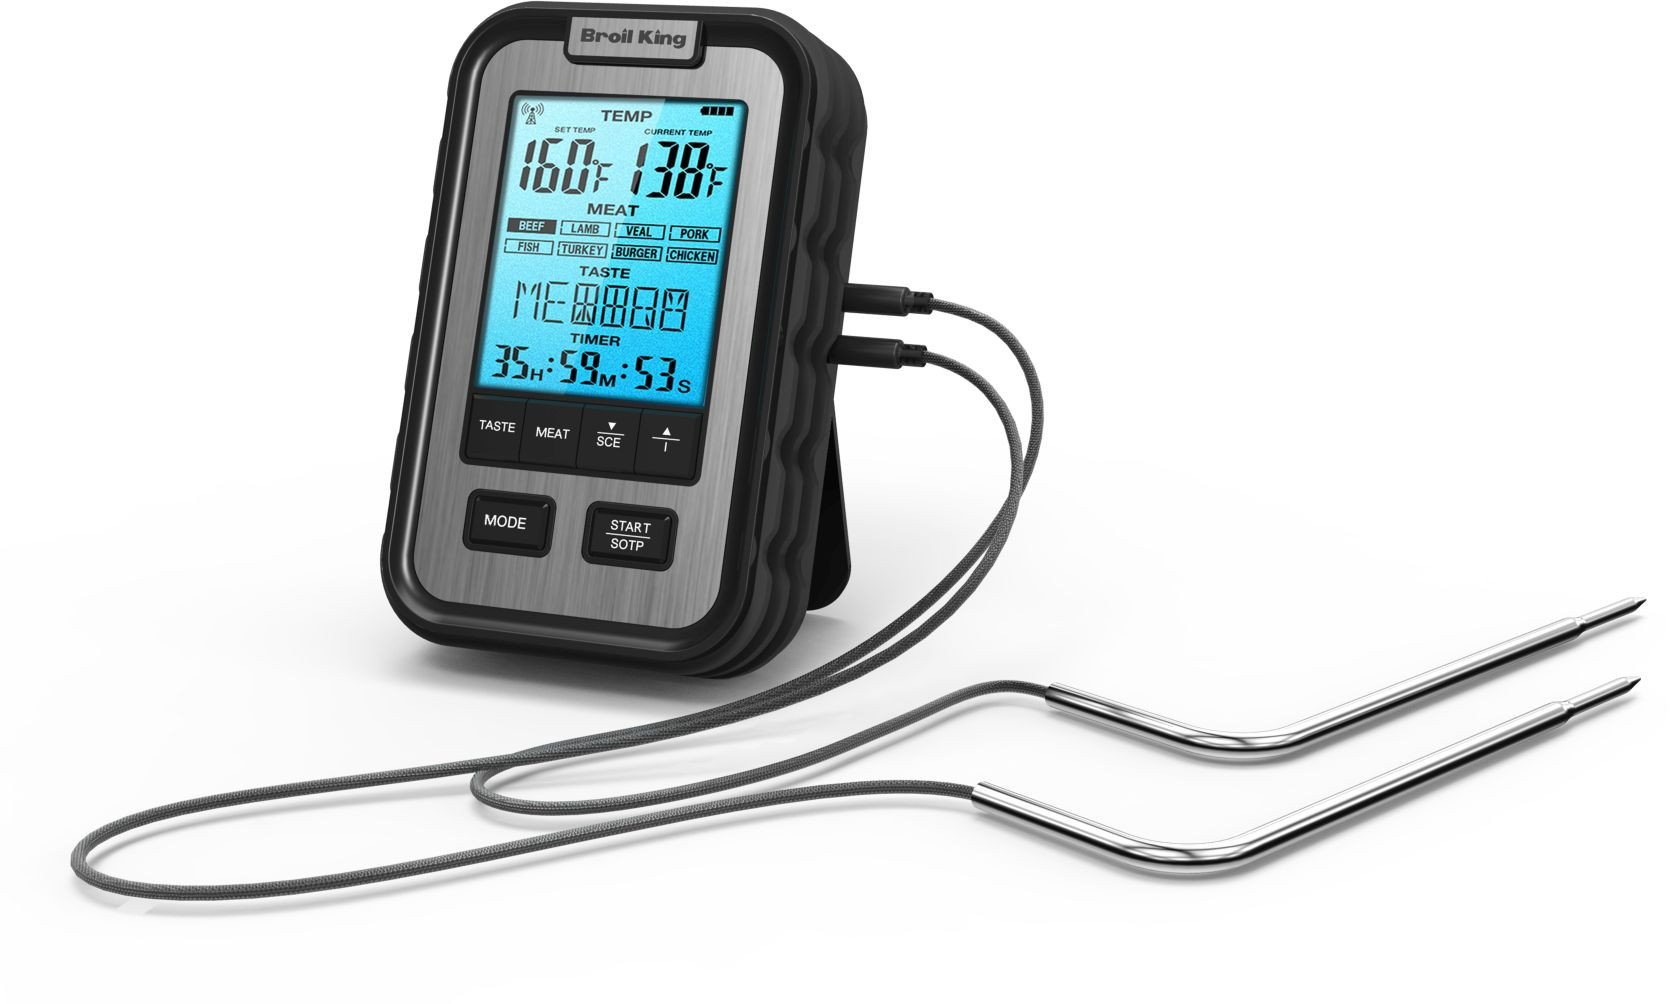 Broil King digital meat thermometer with stand 61935